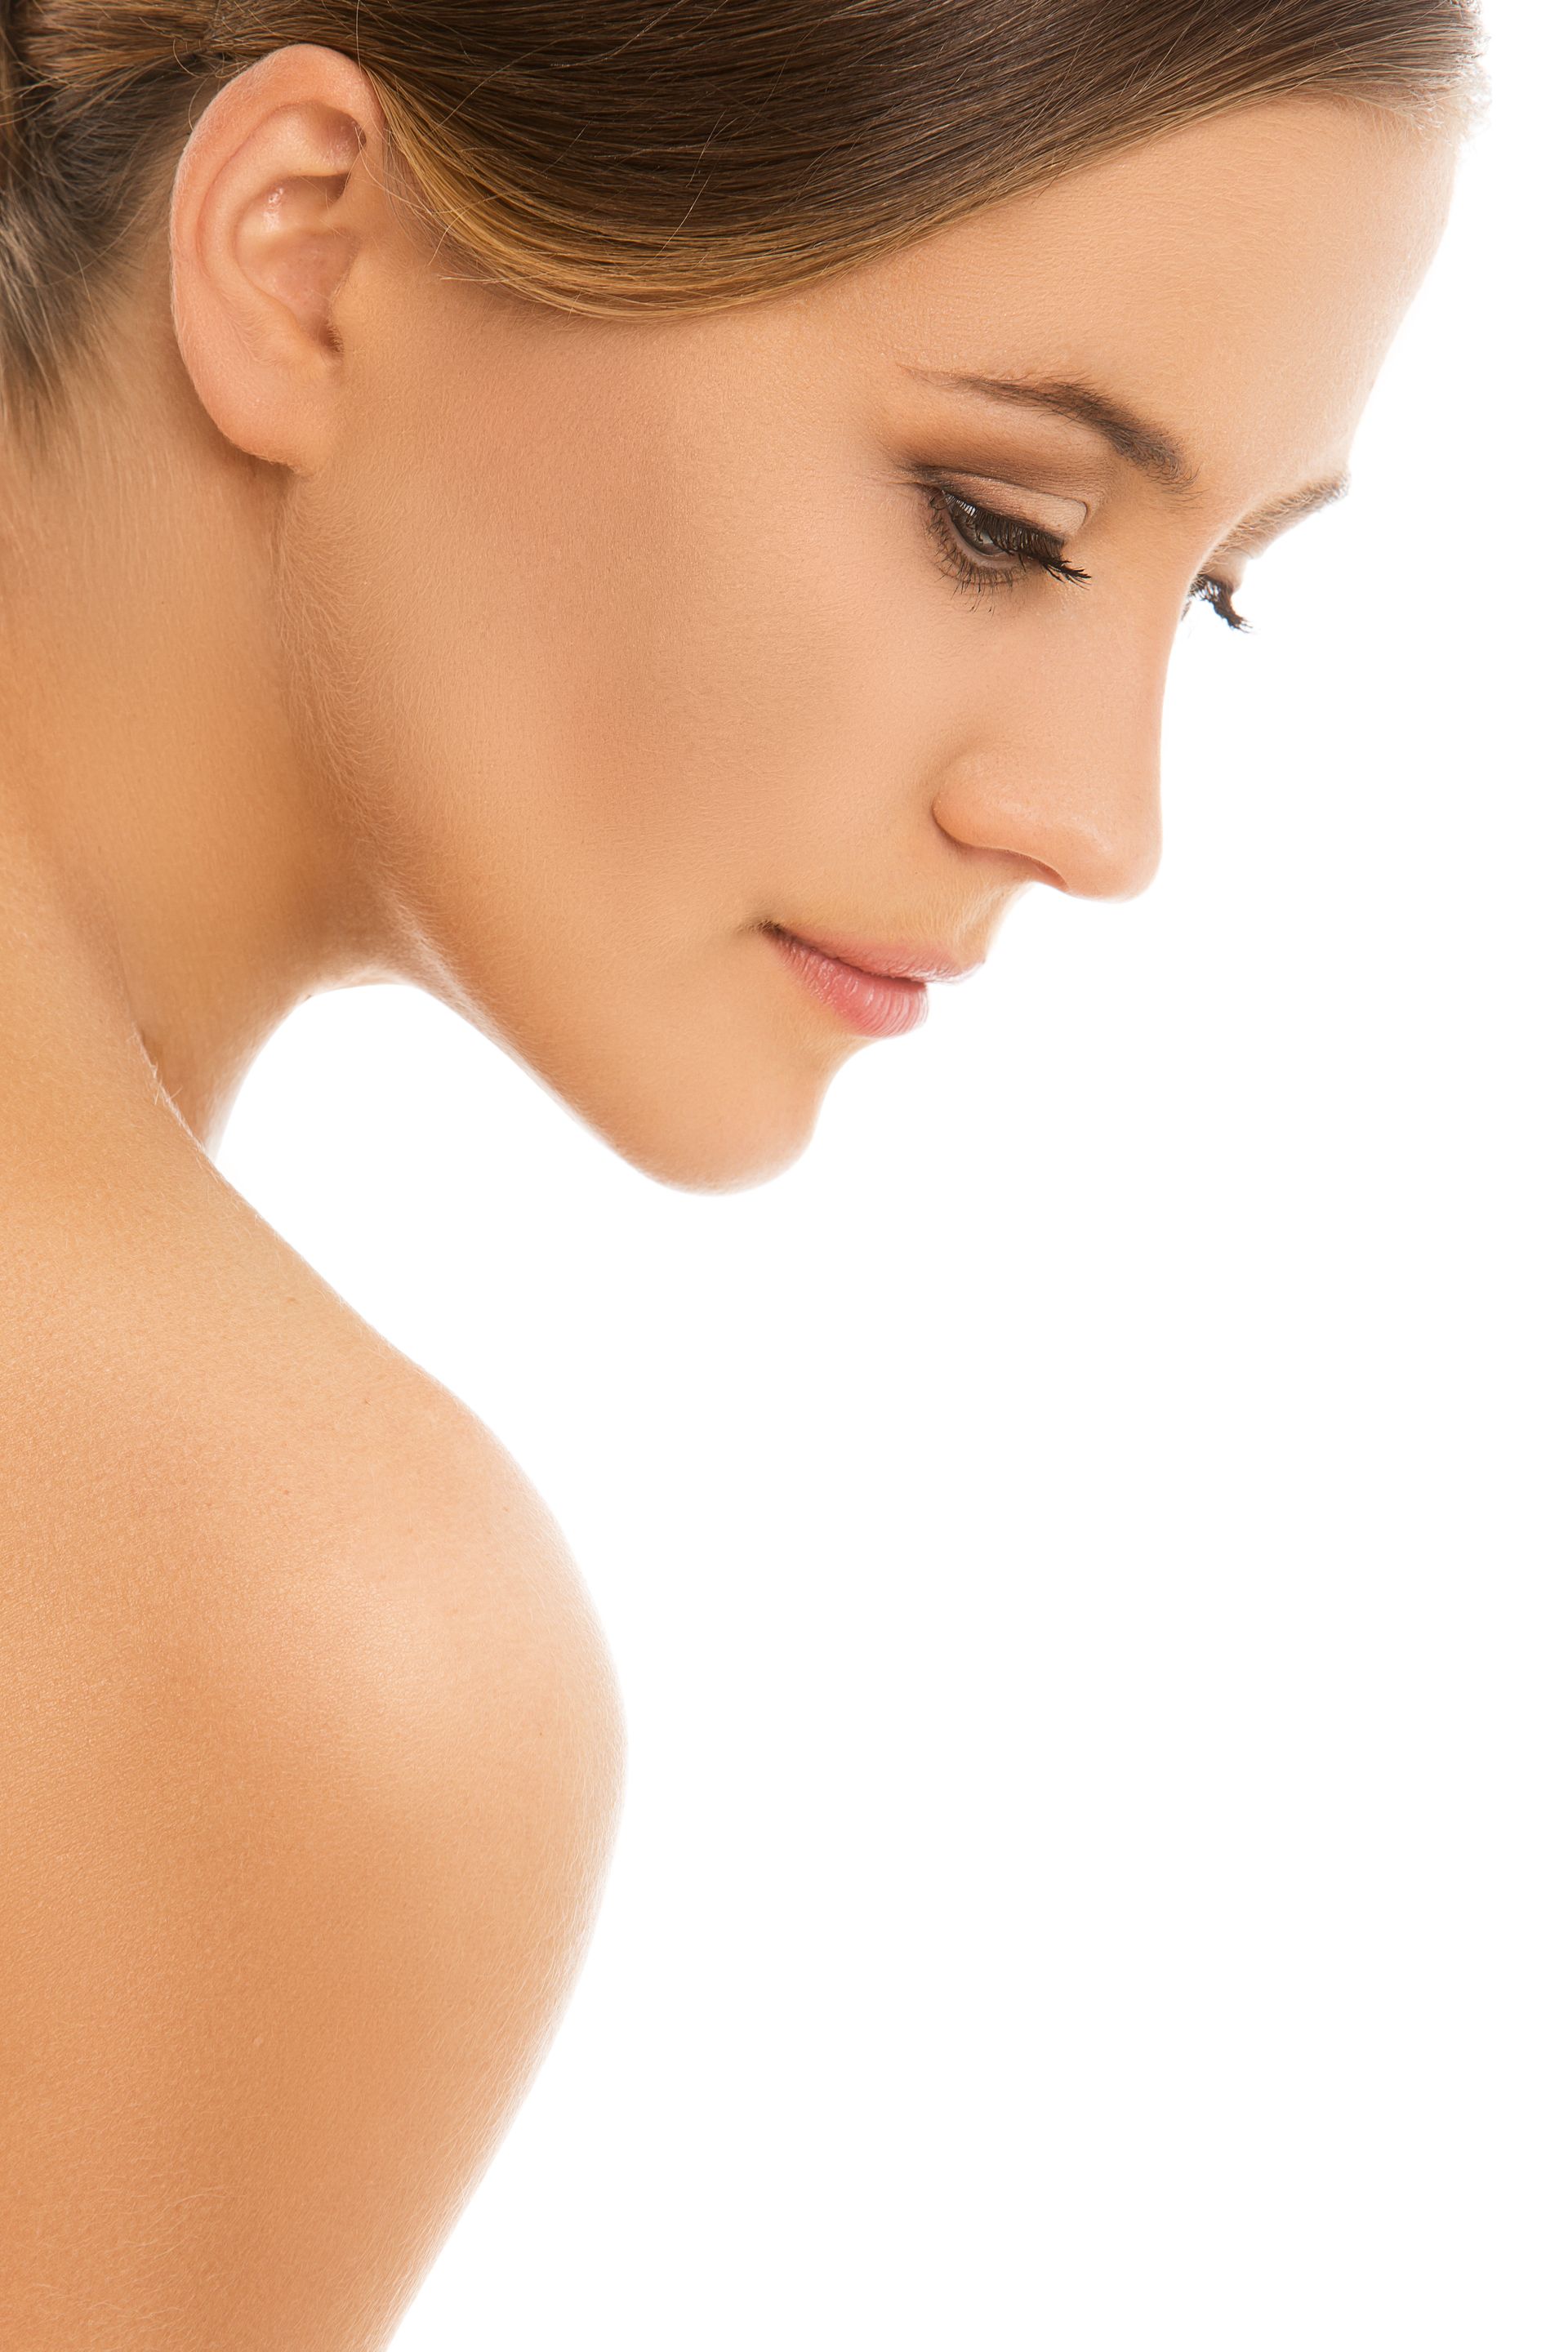 A close up of a woman 's face and shoulder on a white background.